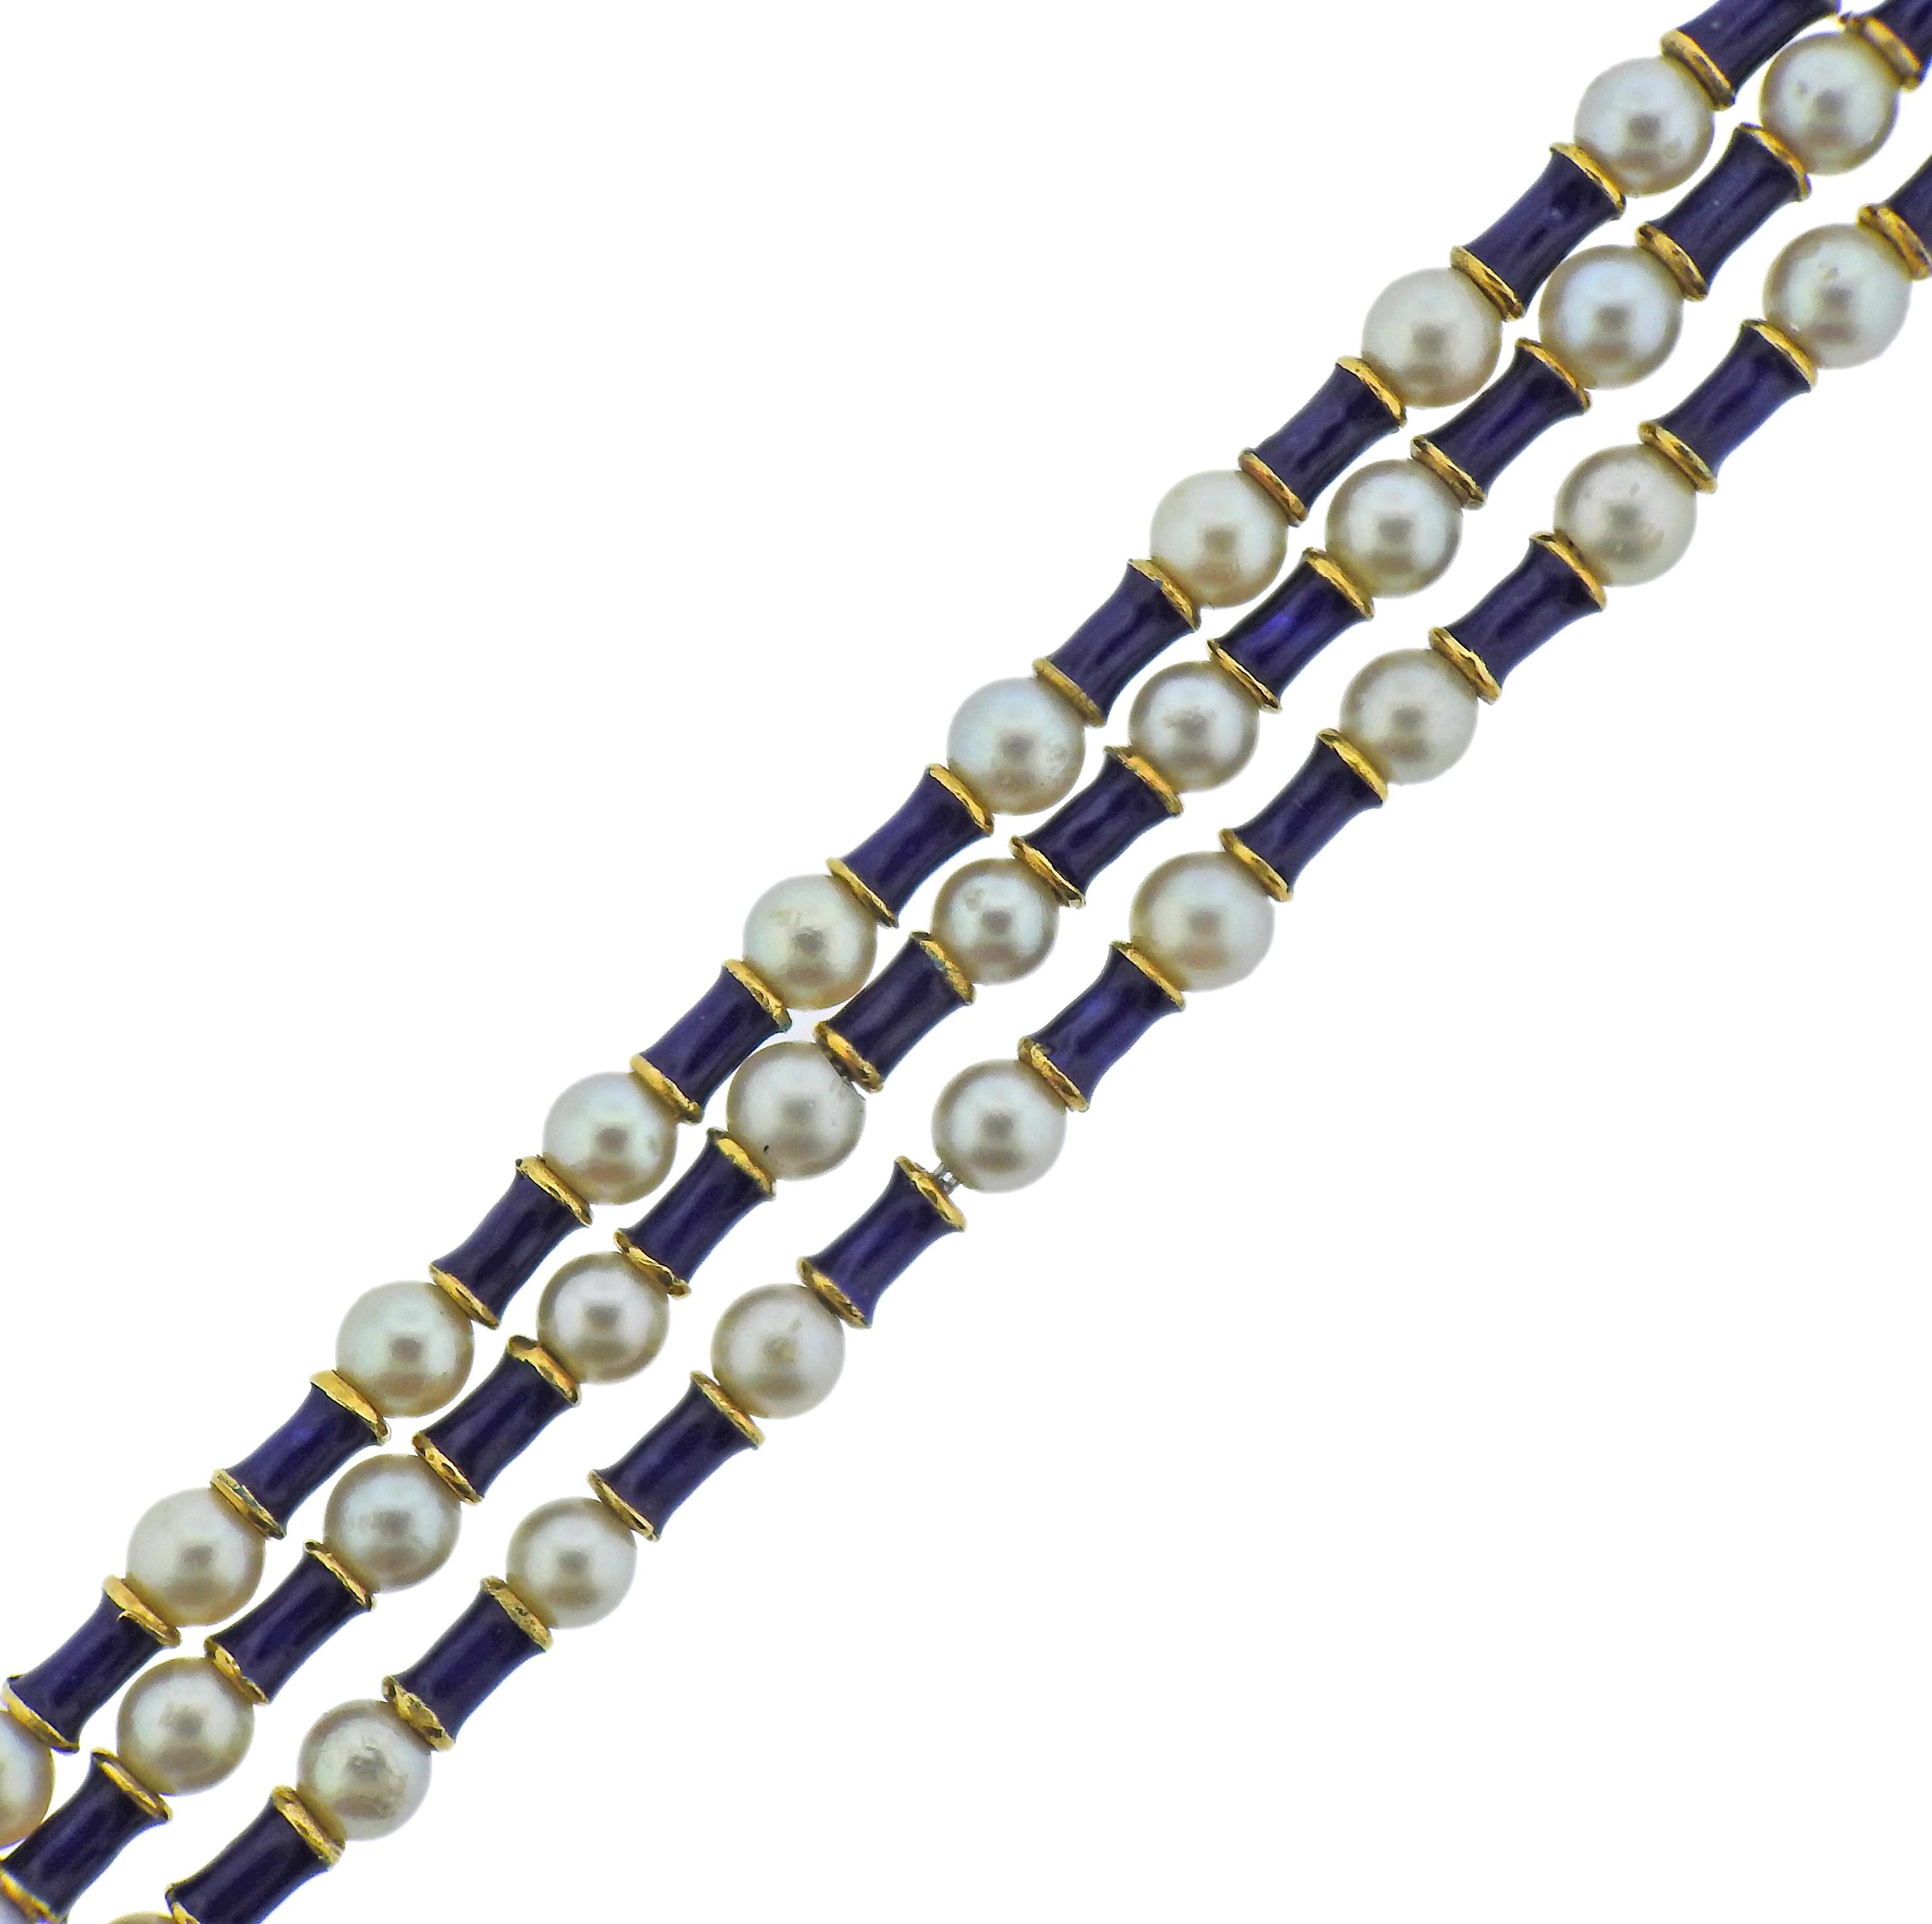 18k gold three strand bracelet, decorated with blue enamel and 4.5-5mm pearls. Bracelet is 7.5